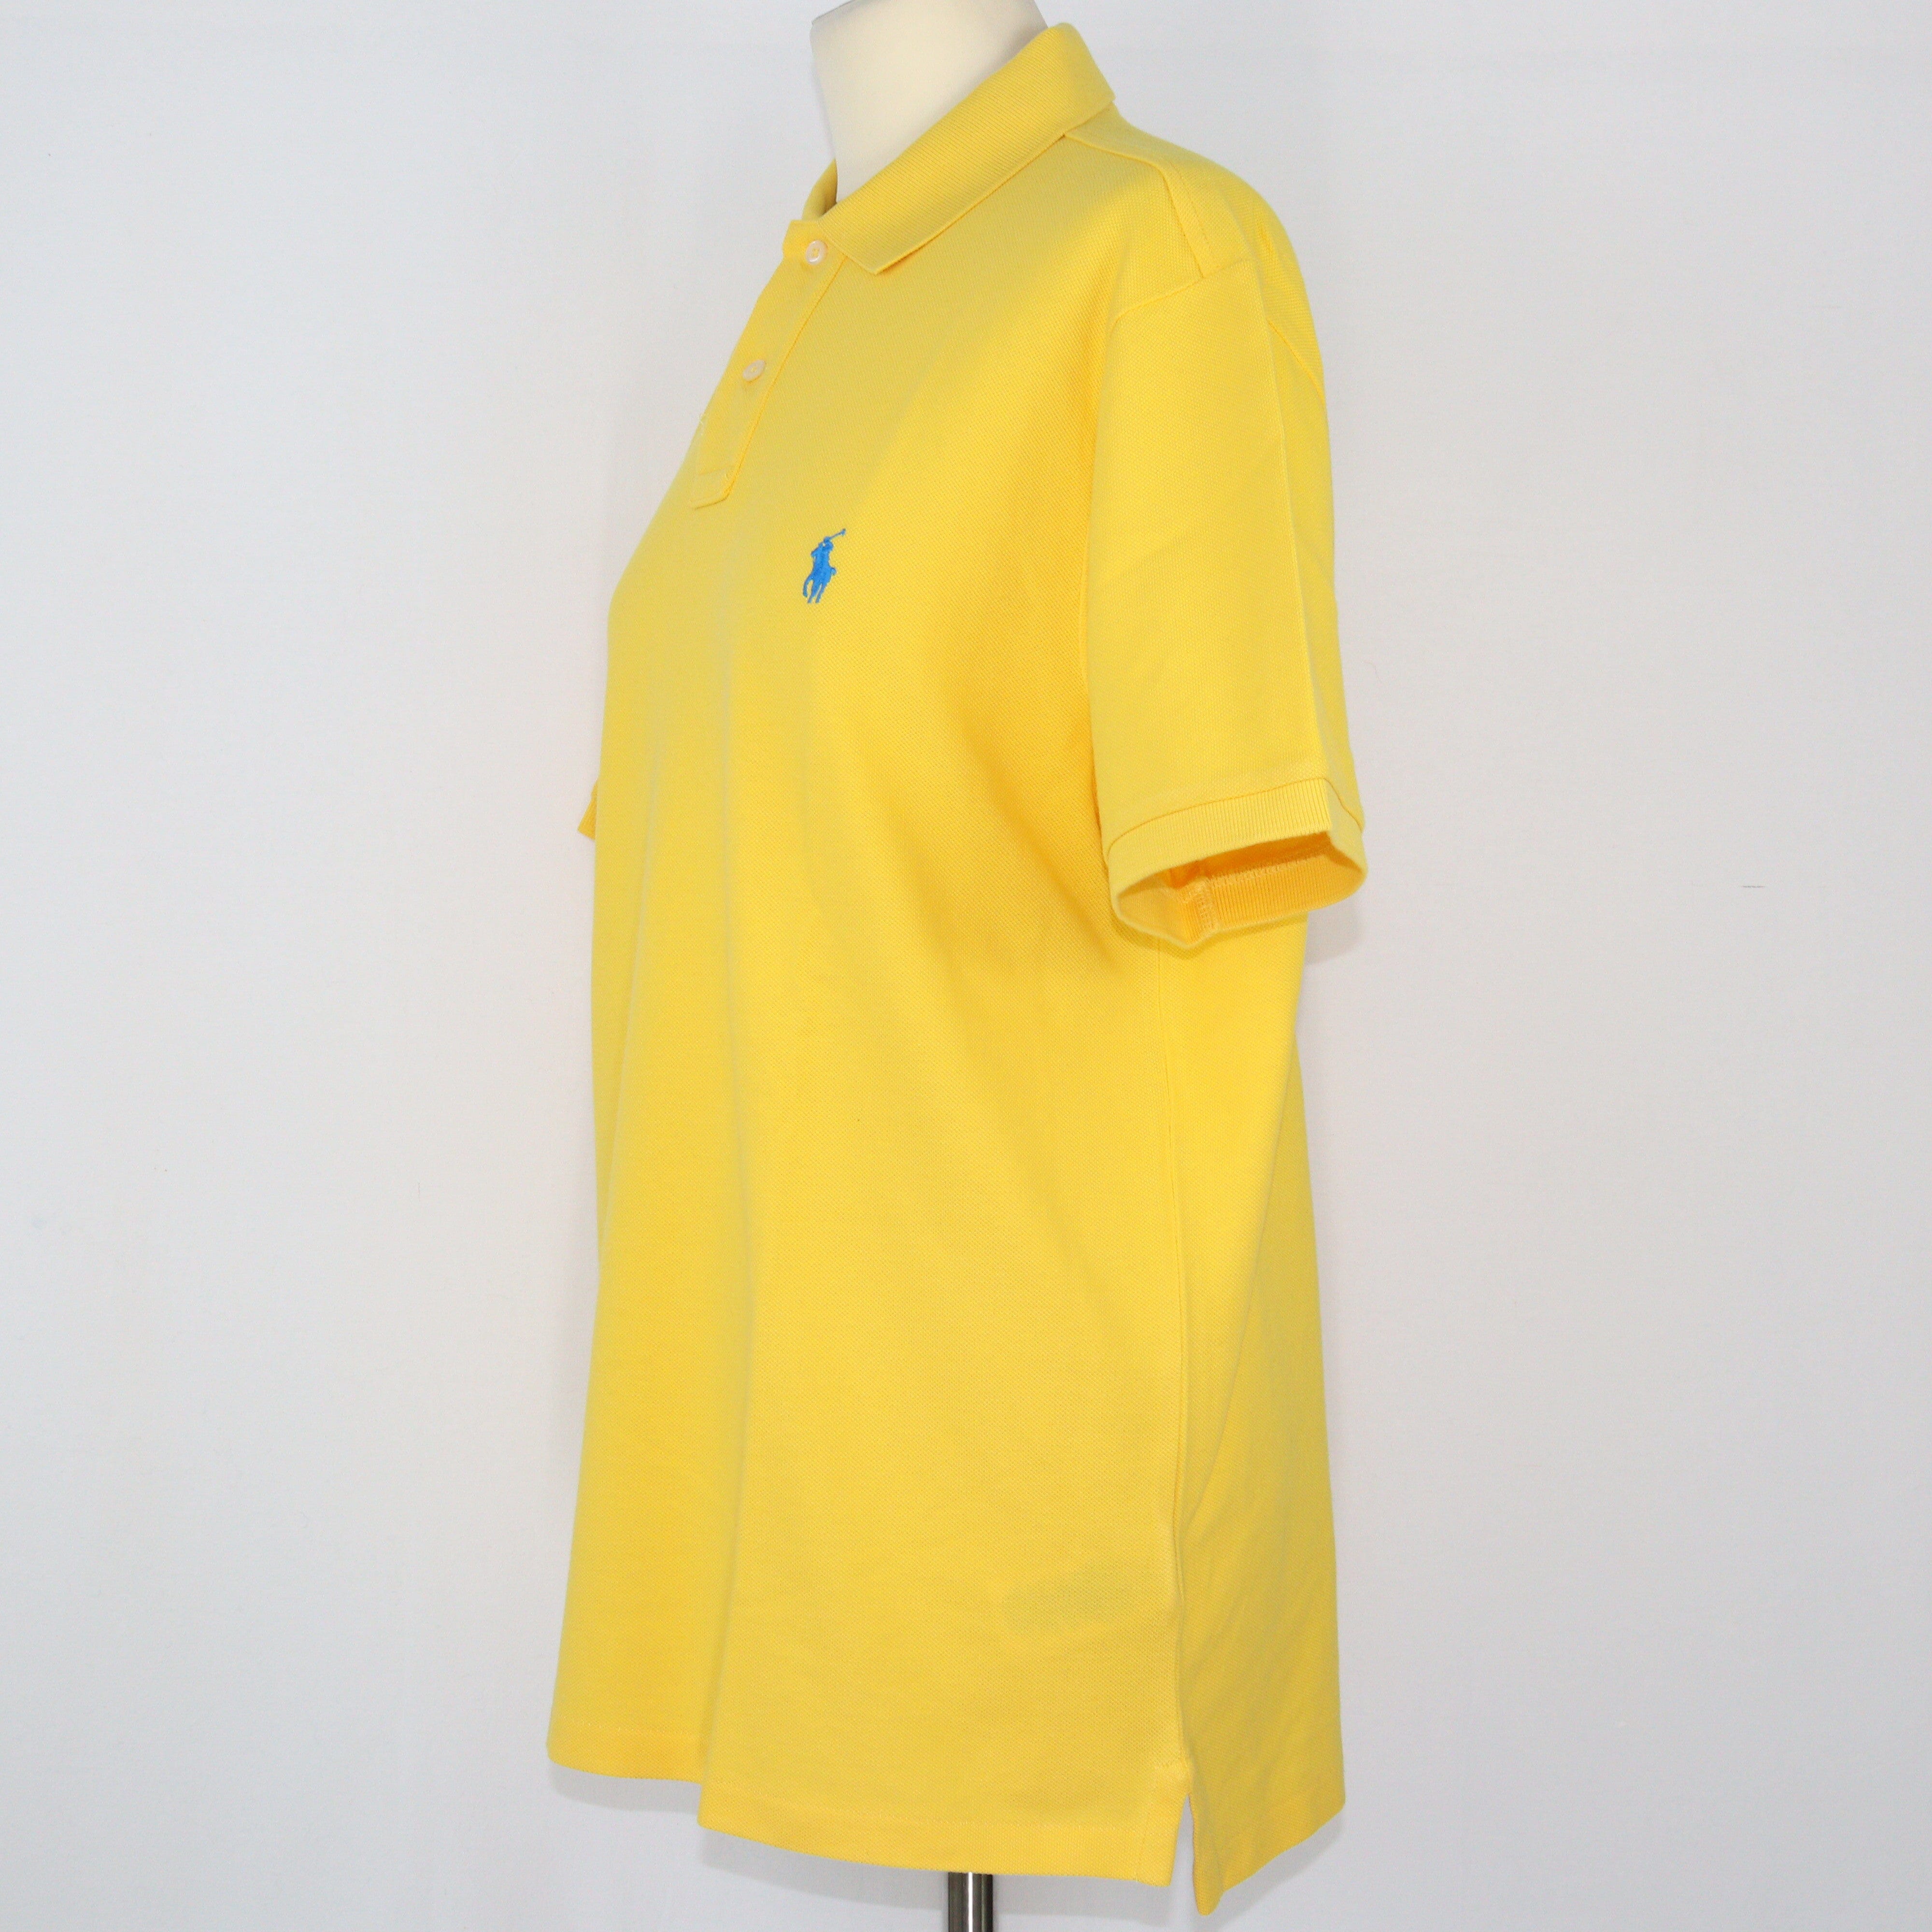 Yellow Pony Embroidered Polo Shirt Clothings Ralph Lauren 